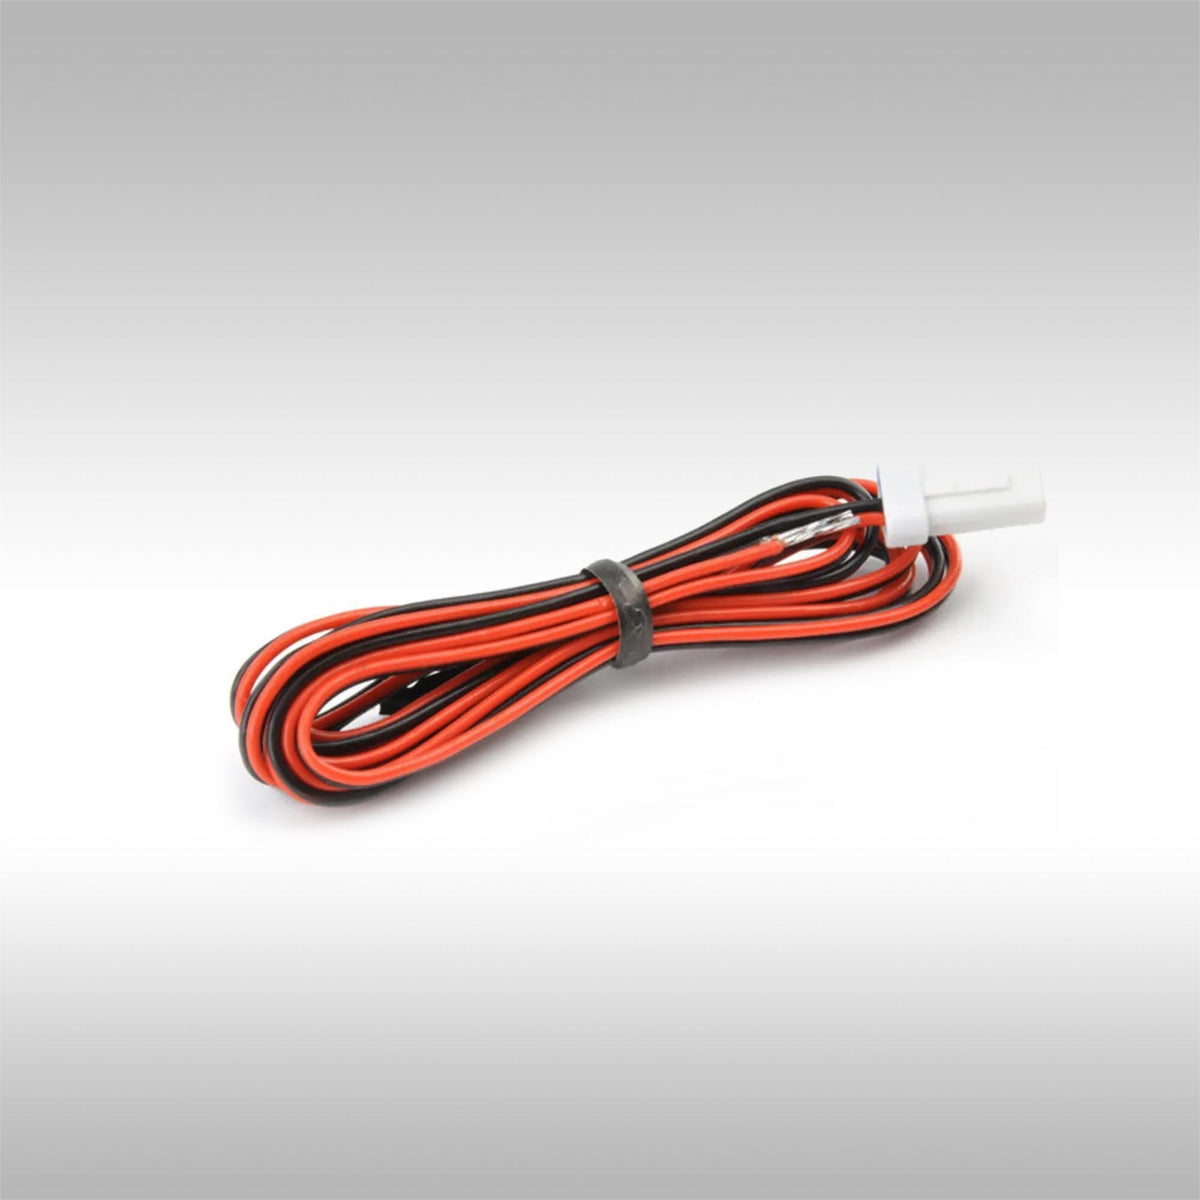 TRAIL TECH - REPLACEMENT POWER CABLE - 48 INCH